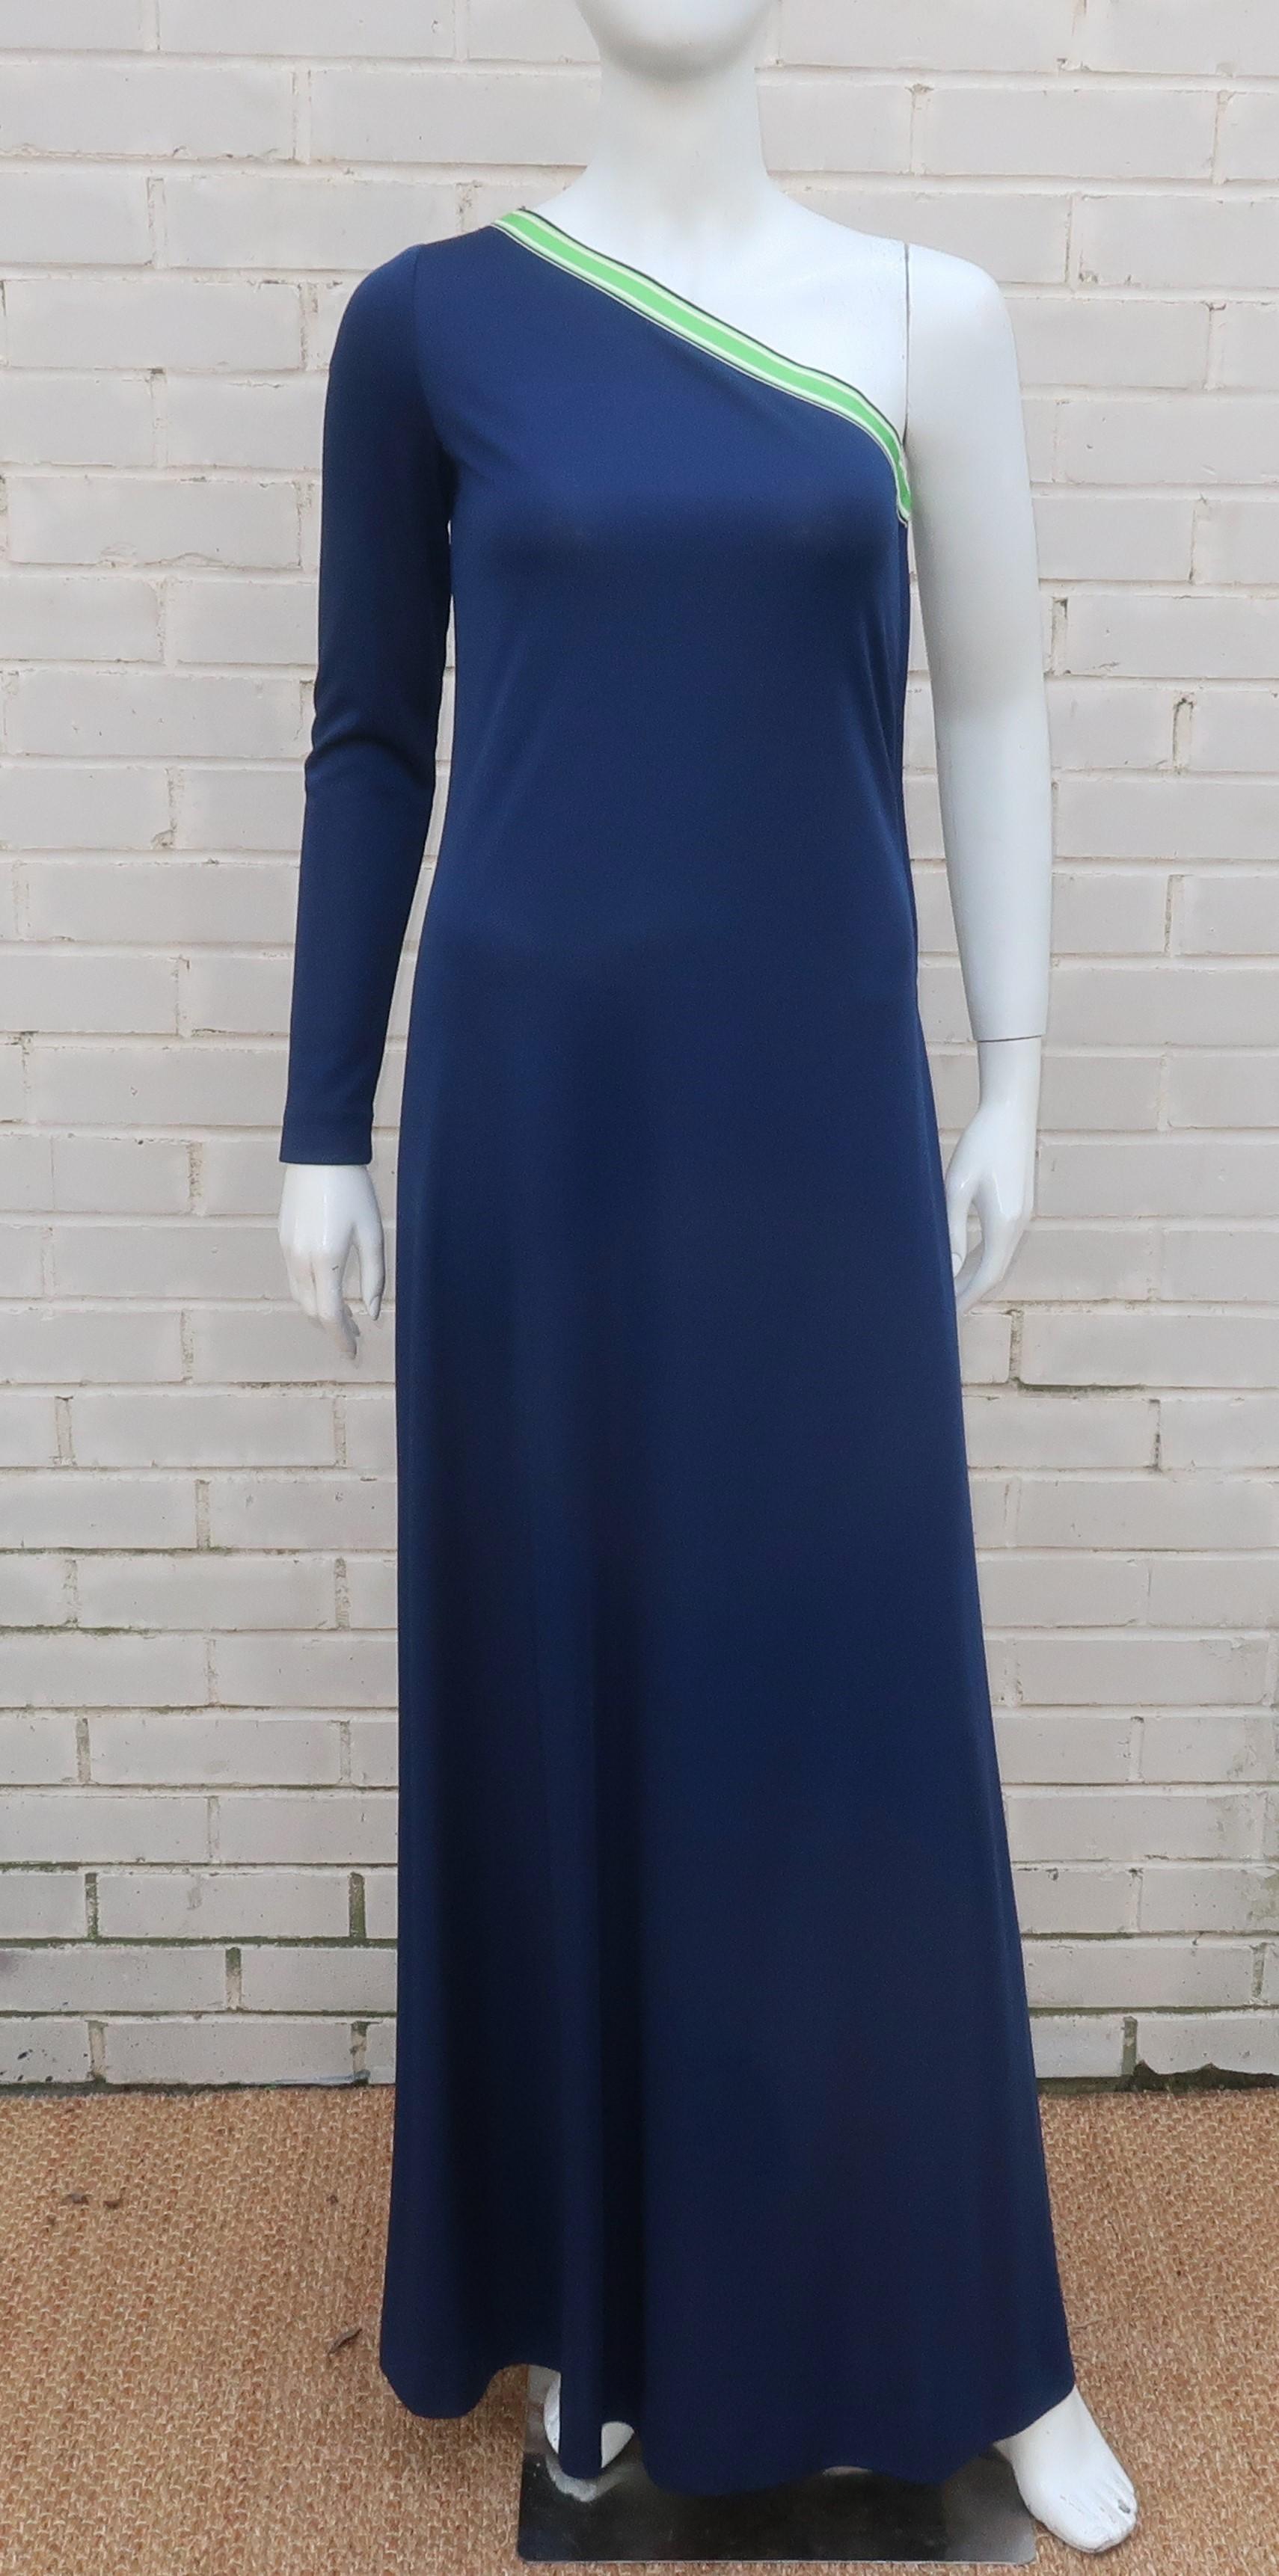 1970's Dalani II navy blue jersey maxi dress with a sporty grosgrain ribbon trim in bright white and Spring green.  This clever one shoulder design features a coordinating one shoulder wrap which creates a fully sleeved look when worn together.  The